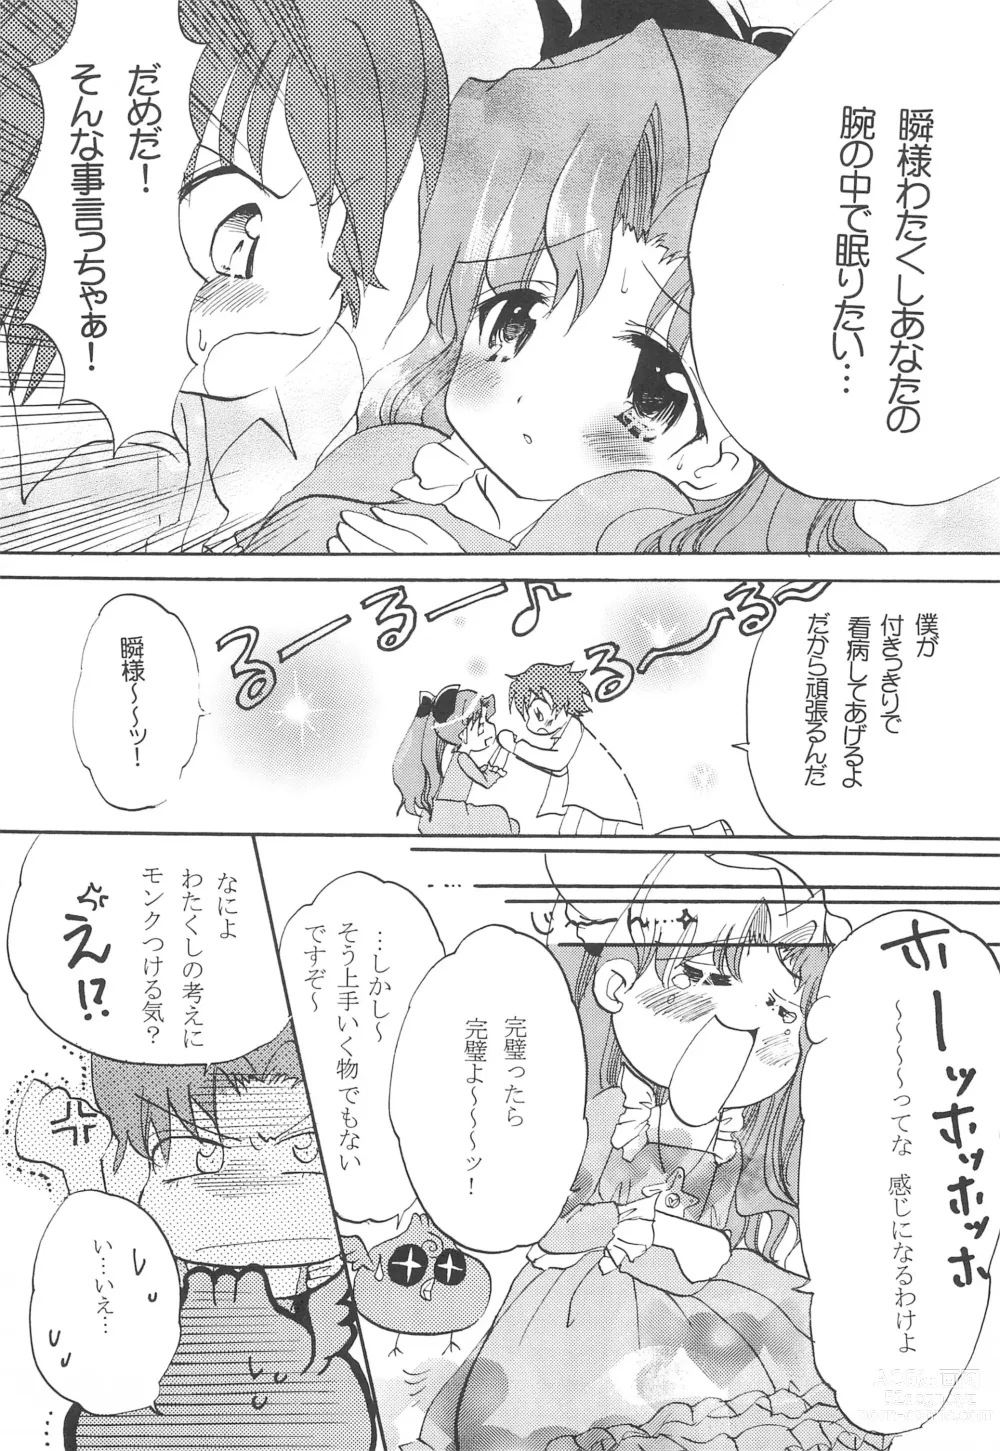 Page 21 of doujinshi Twinkle Melody